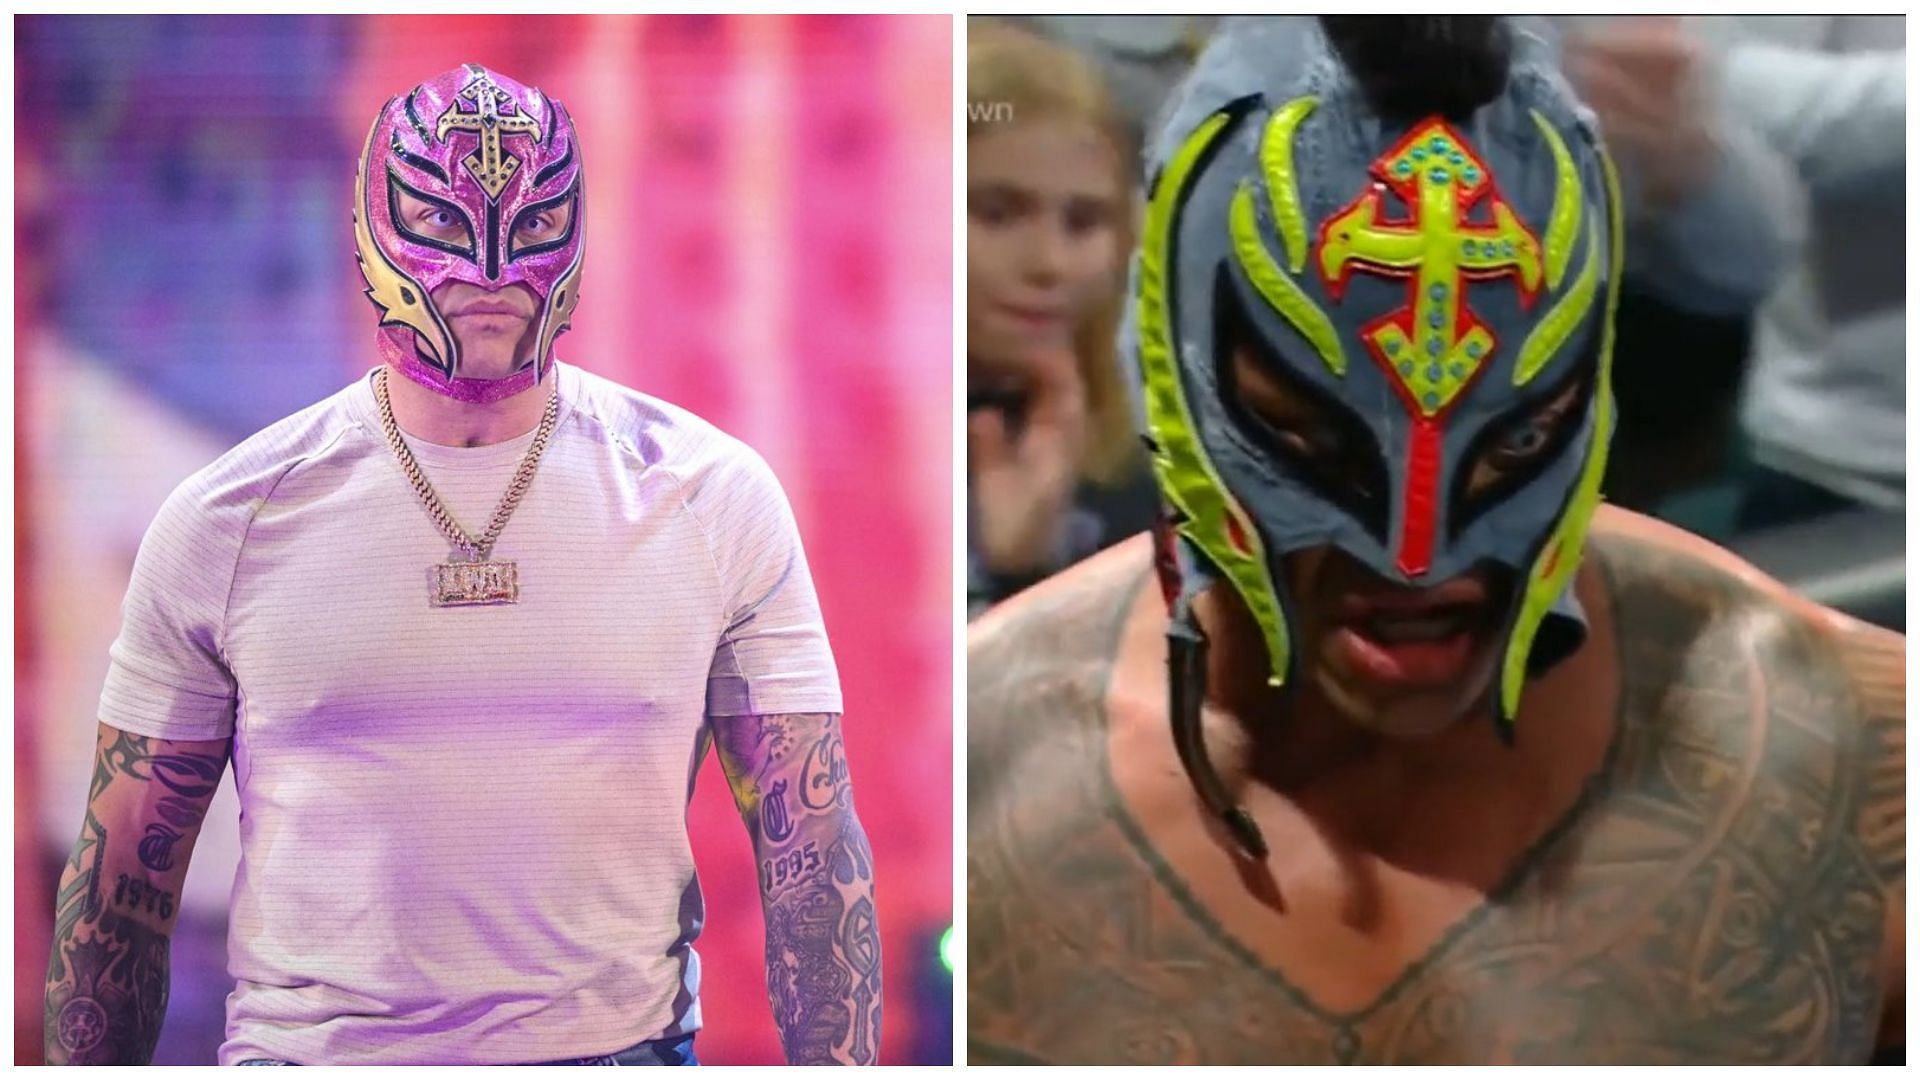 Rey Mysterio is a former WWE champion.